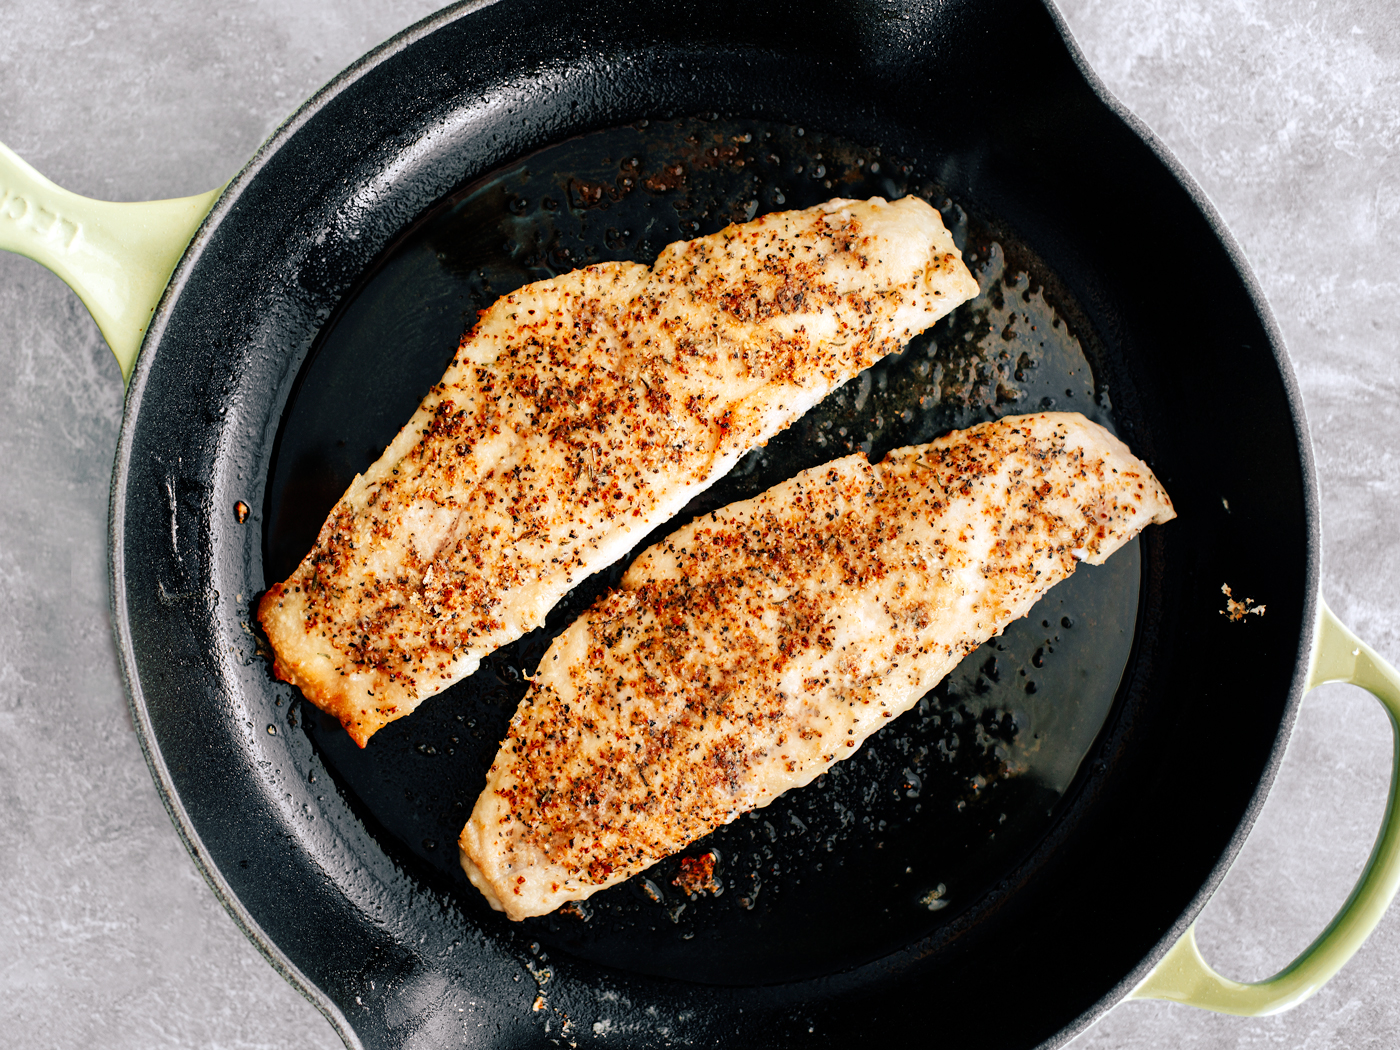 Skillet with seasoned and cooked grouper fillets in it.